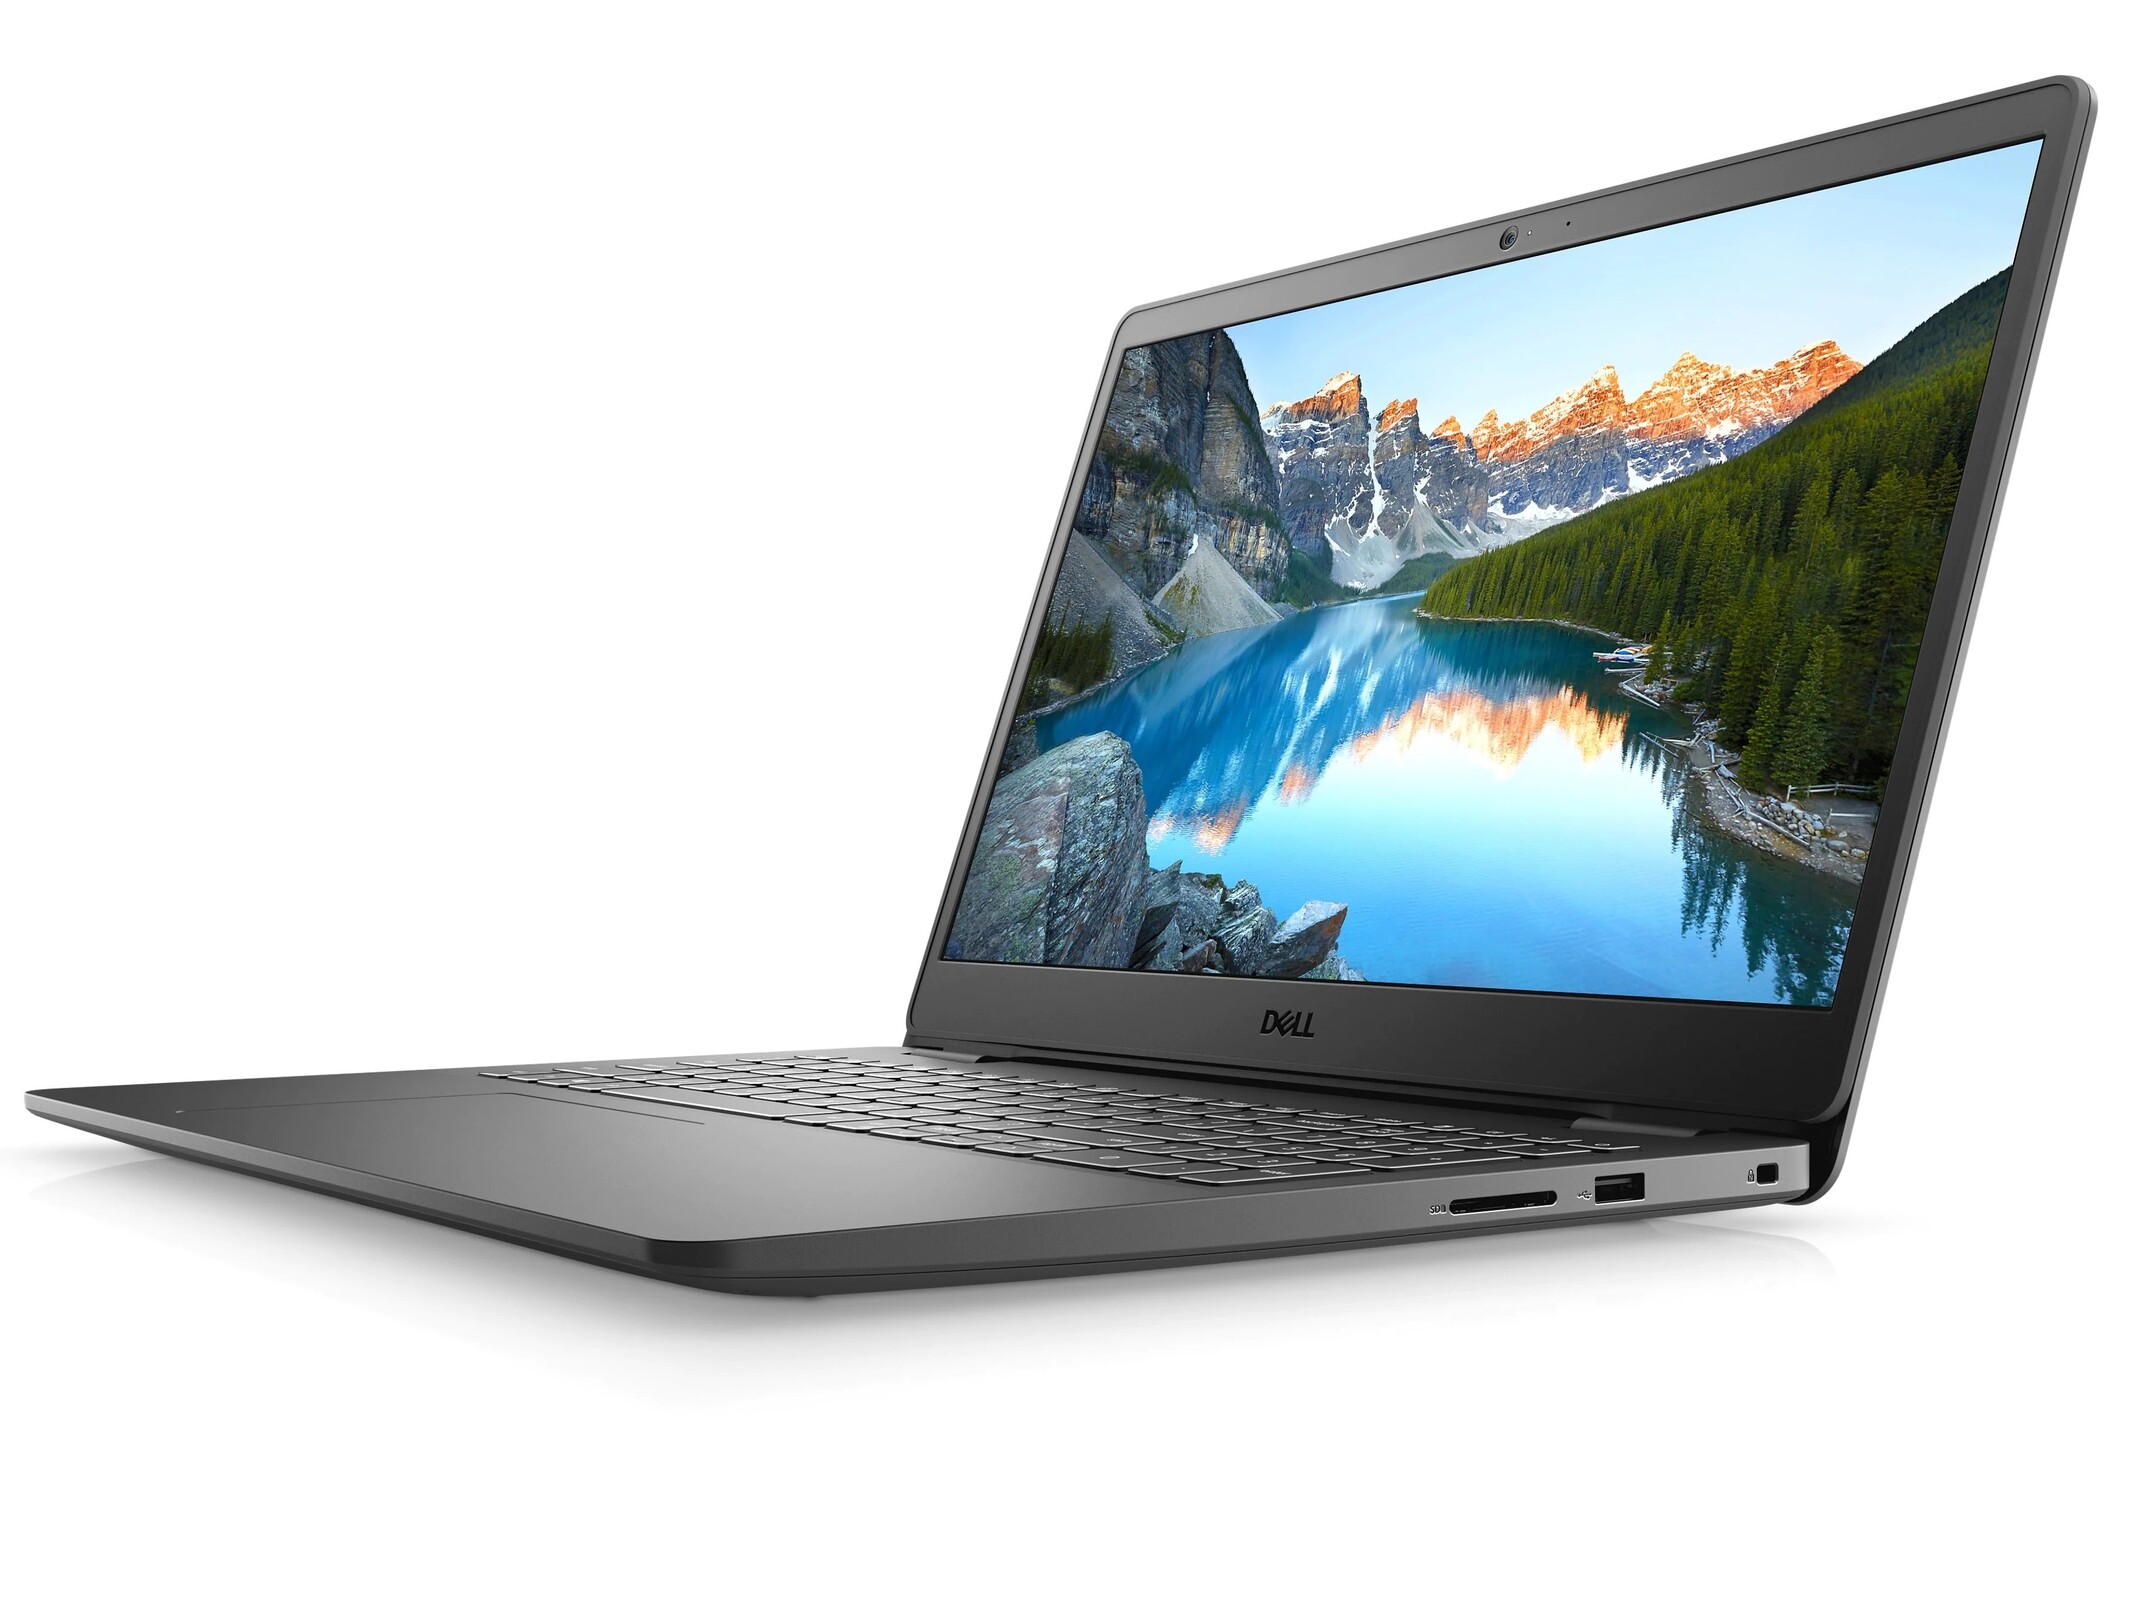 worm Score hand Dell Inspiron 15 3501 on sale with the same 11th gen Core i7 CPU as the XPS  13 9310 for just half the price at $650 USD - NotebookCheck.net News